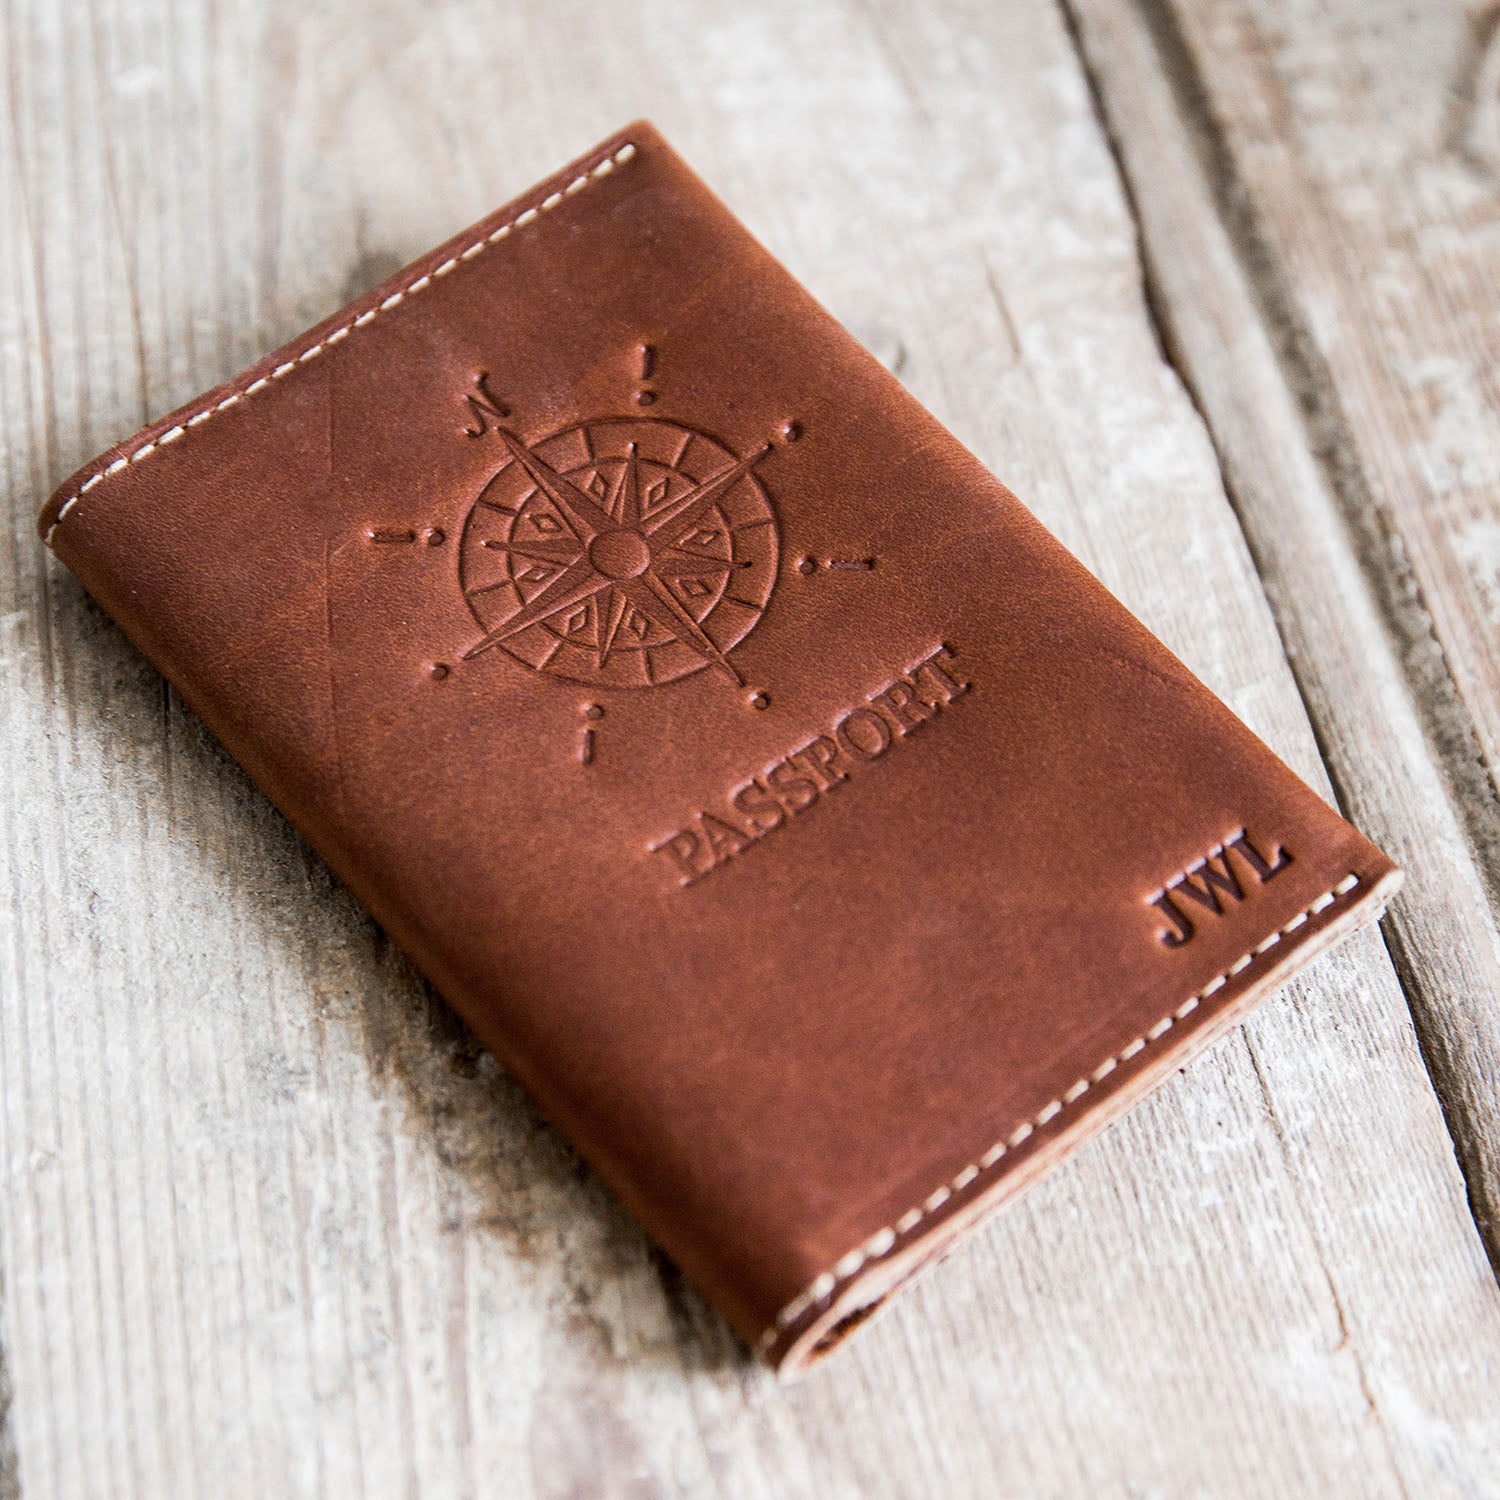 Passport Holder in 100% recycled leather - Miss Wood – Misswood